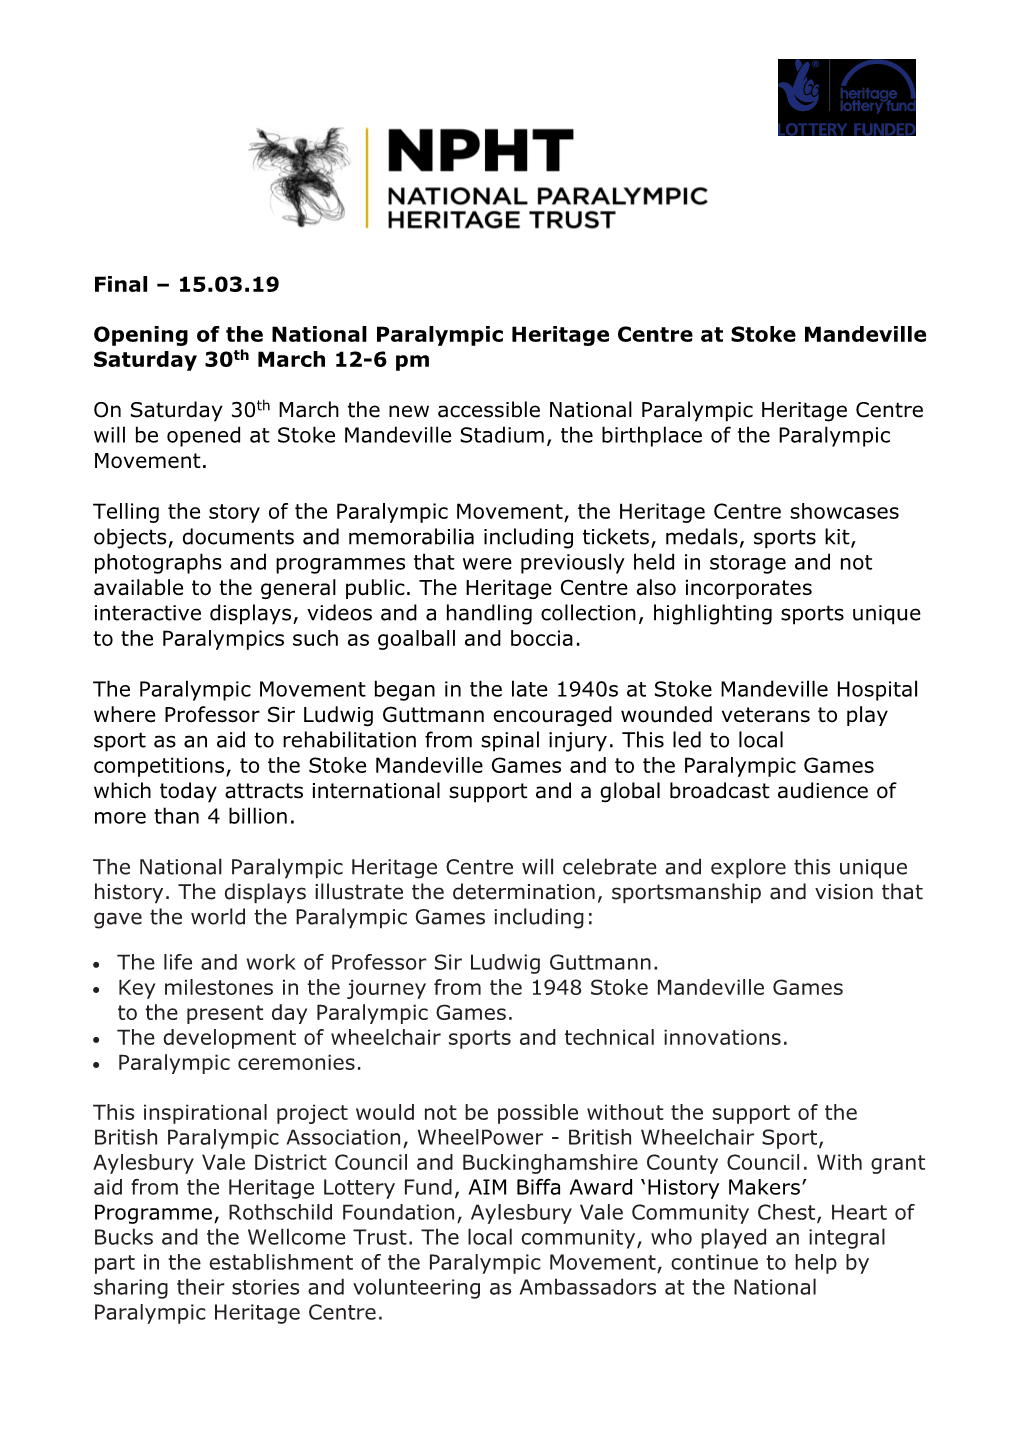 Opening of the National Paralympic Heritage Centre at Stoke Mandeville Saturday 30Th March 12-6 Pm